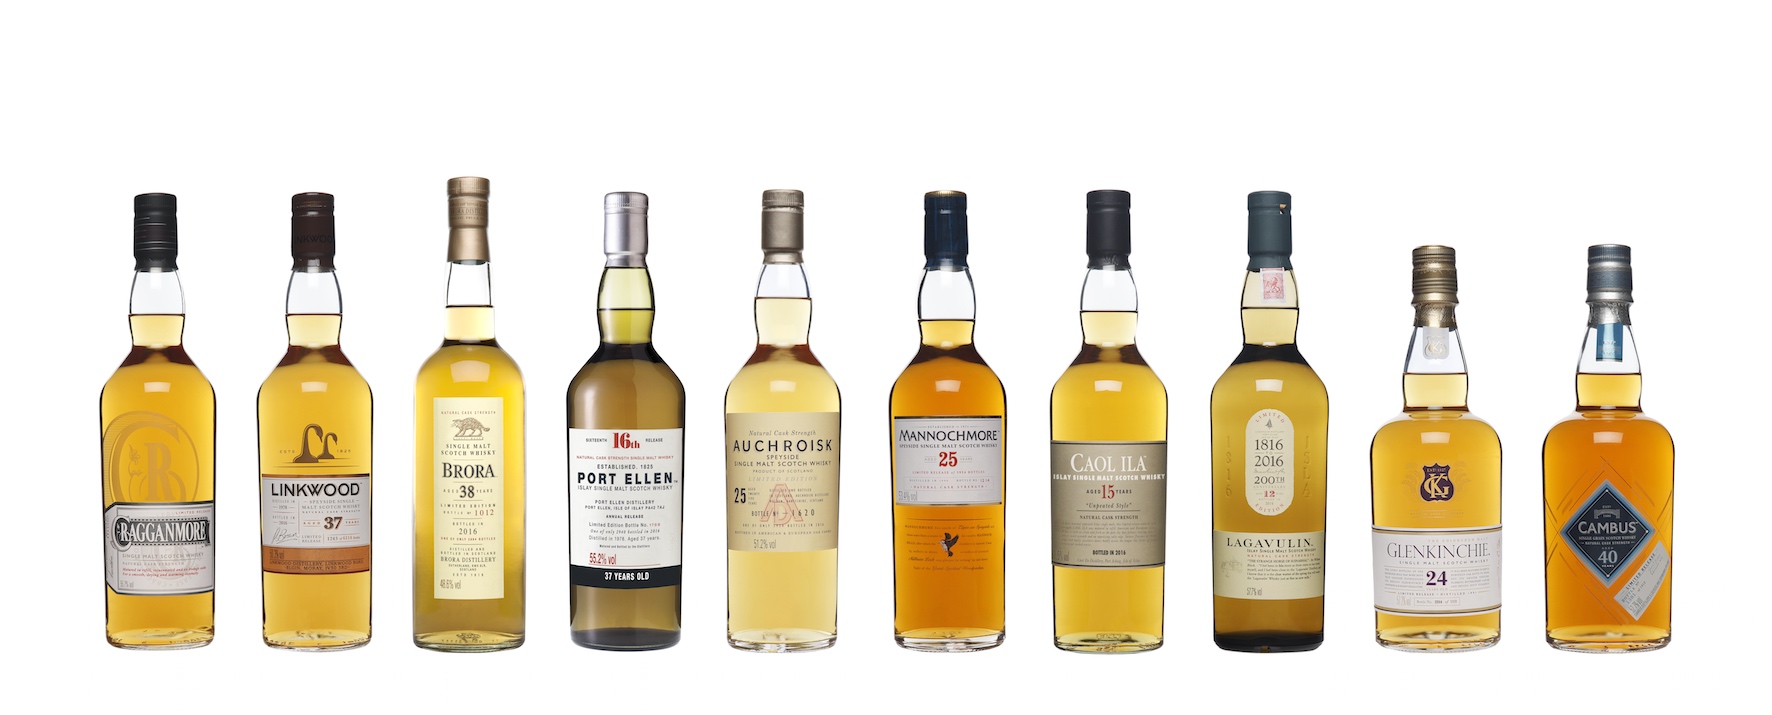 Diageo's special releases 2016: I dare you to open a bottle